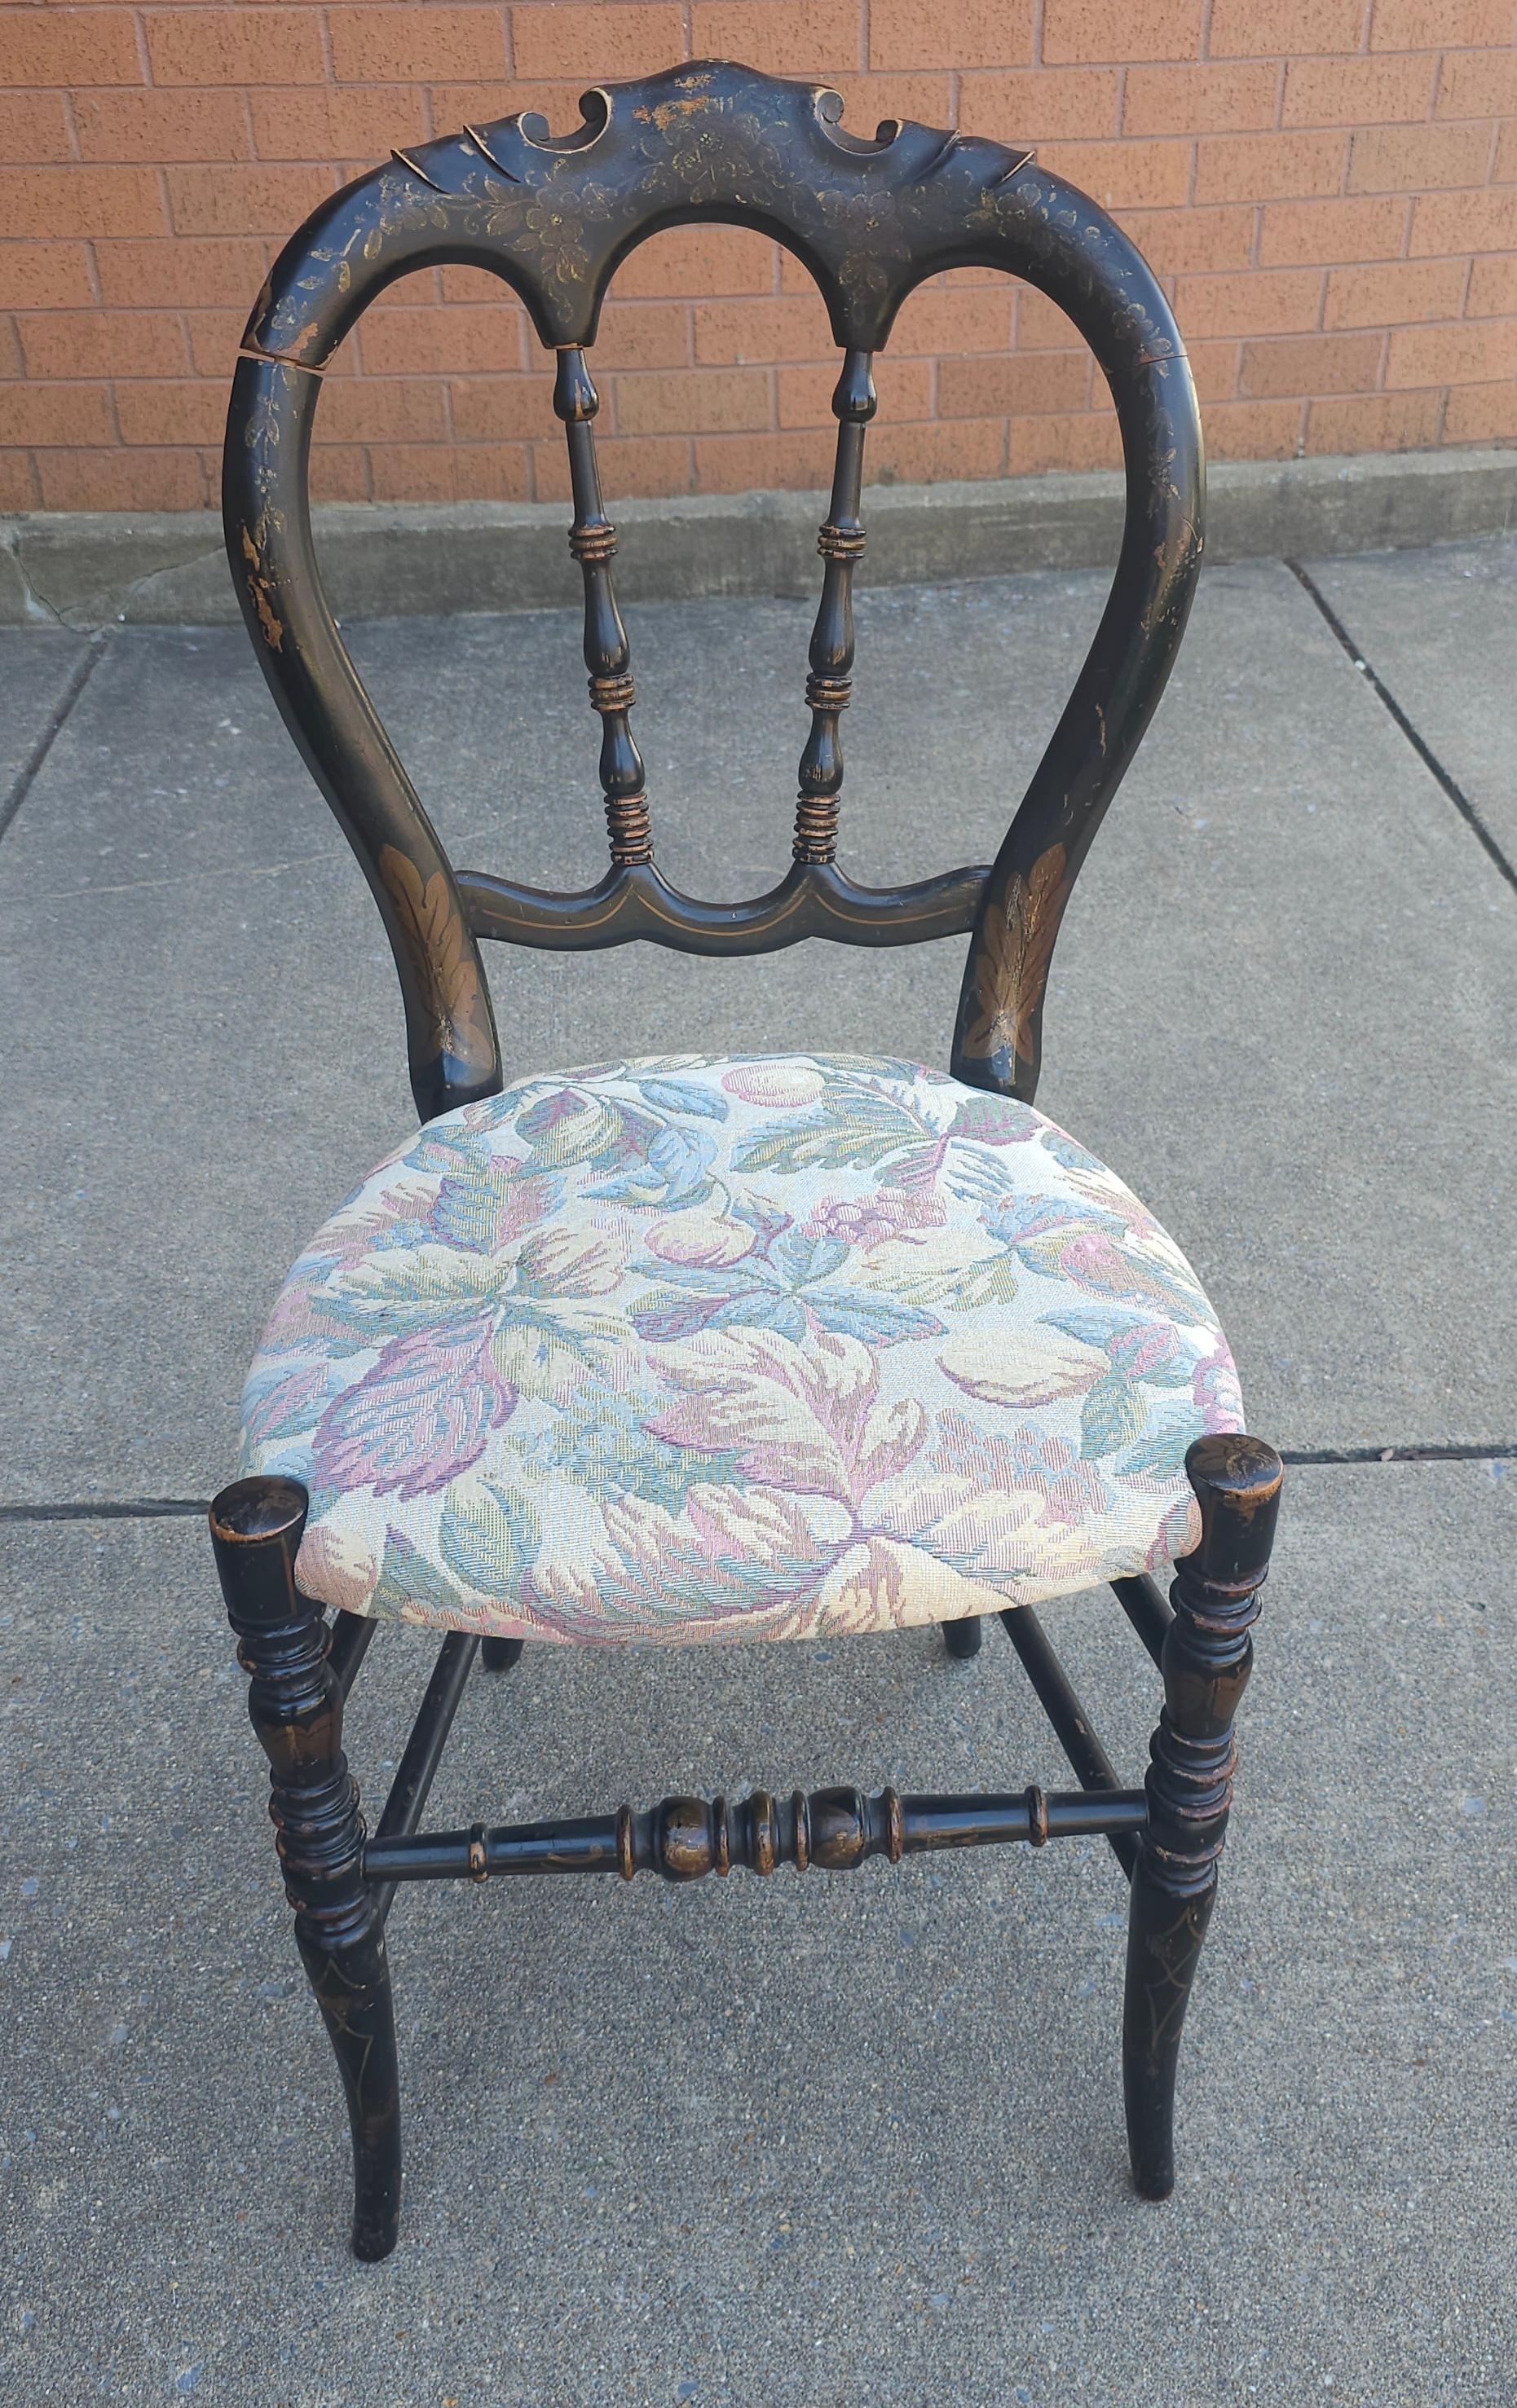 A 19th Century Victorian Ebonized, Decorated and Upholstered Side Chair measuring 16.5